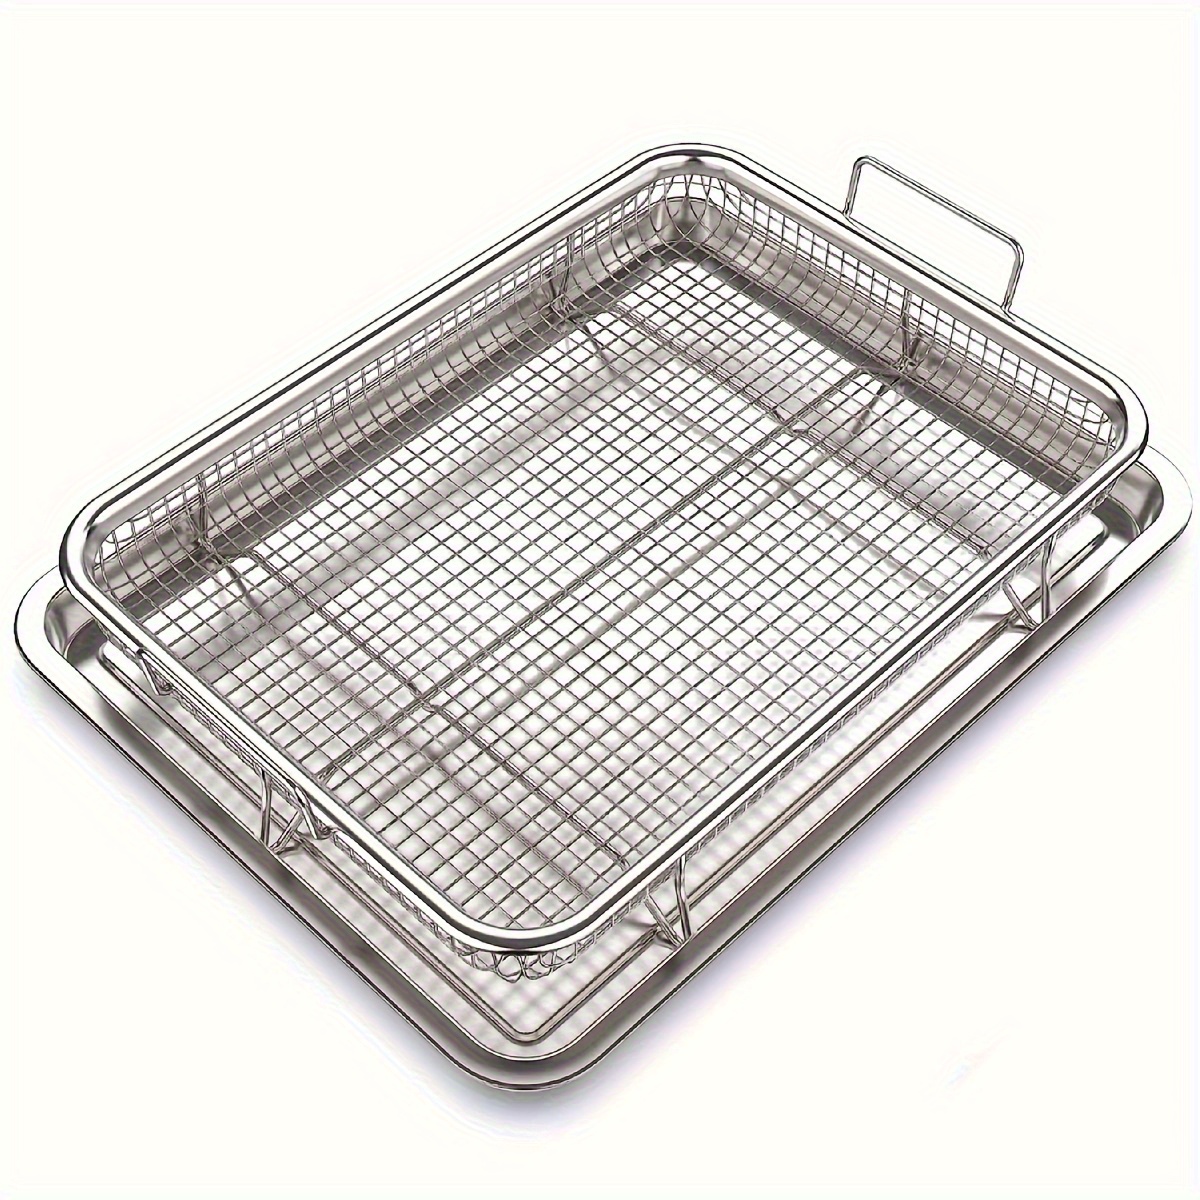 

2pcs/set, Oven Air Fryer Basket, 12.8" X 9.6" Stainless Steel Crisper Box Tray And Pan, Grilling Pan Ideal For Grilling